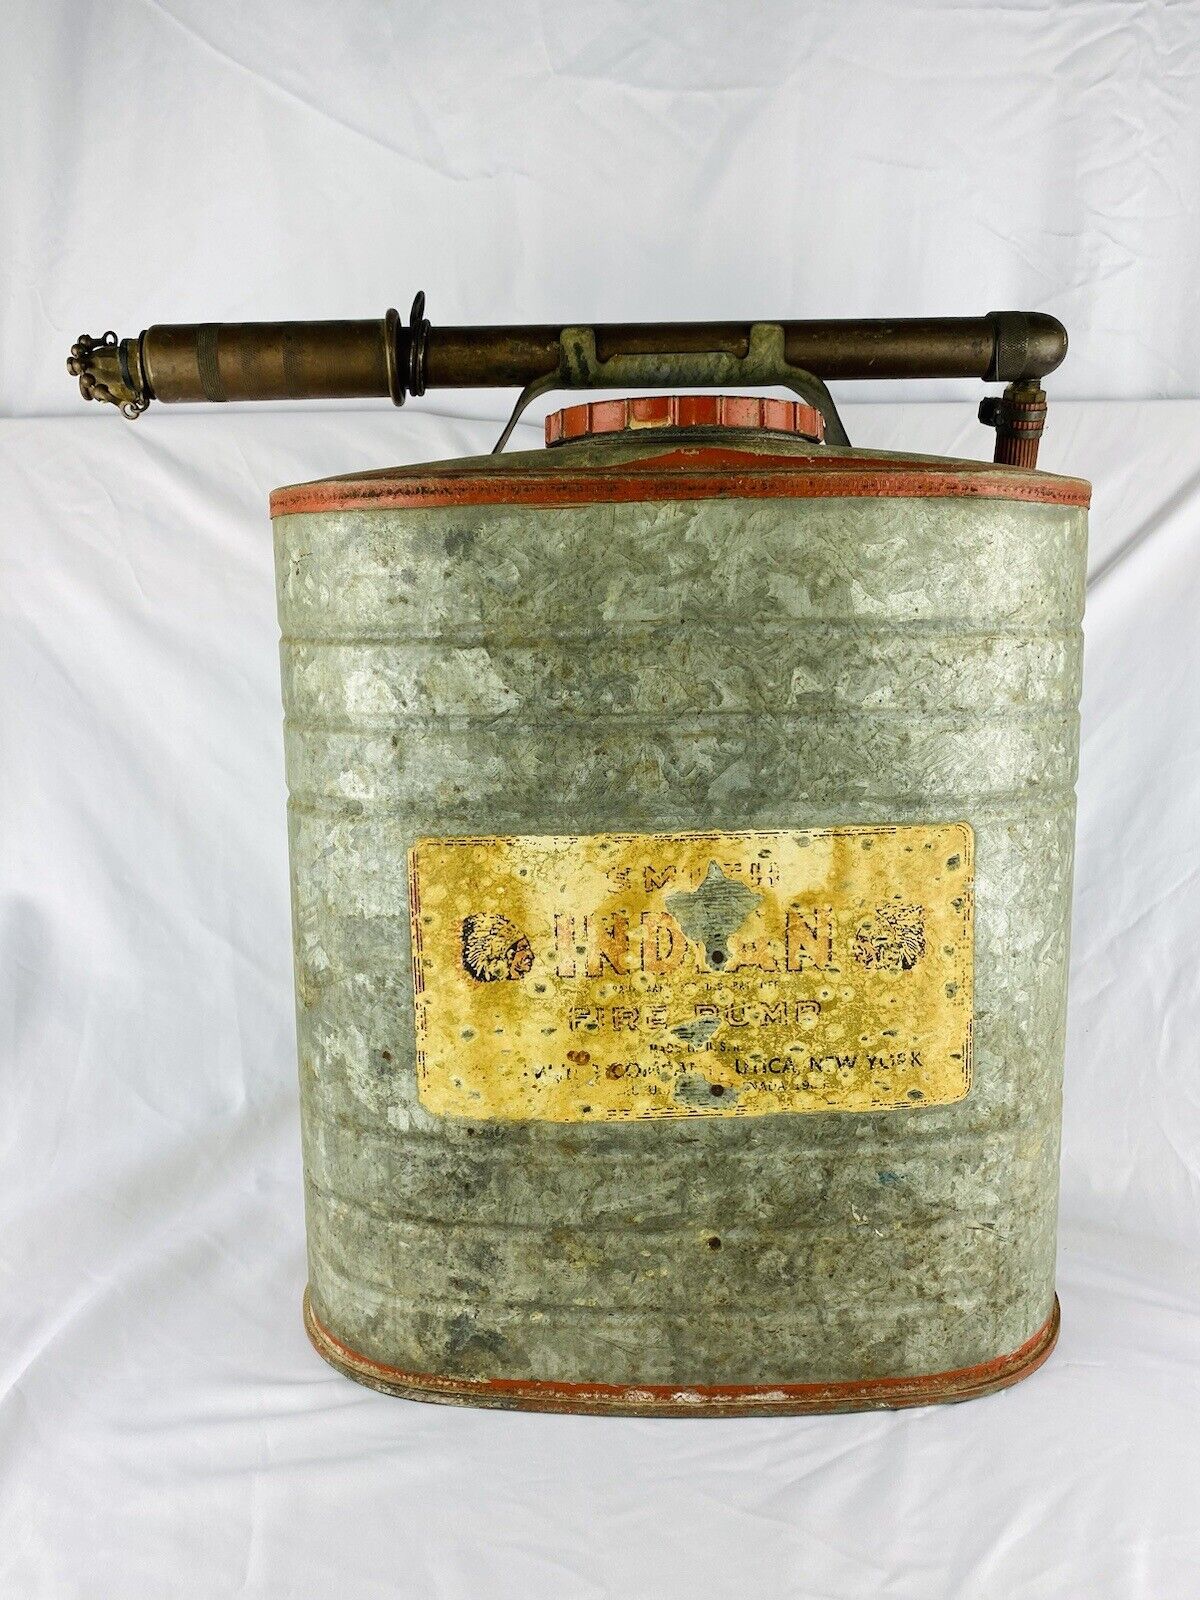 Vintage Indian Backpack Fire Pump D.B. Smith Utica NY-Galvanized w/brass Pump